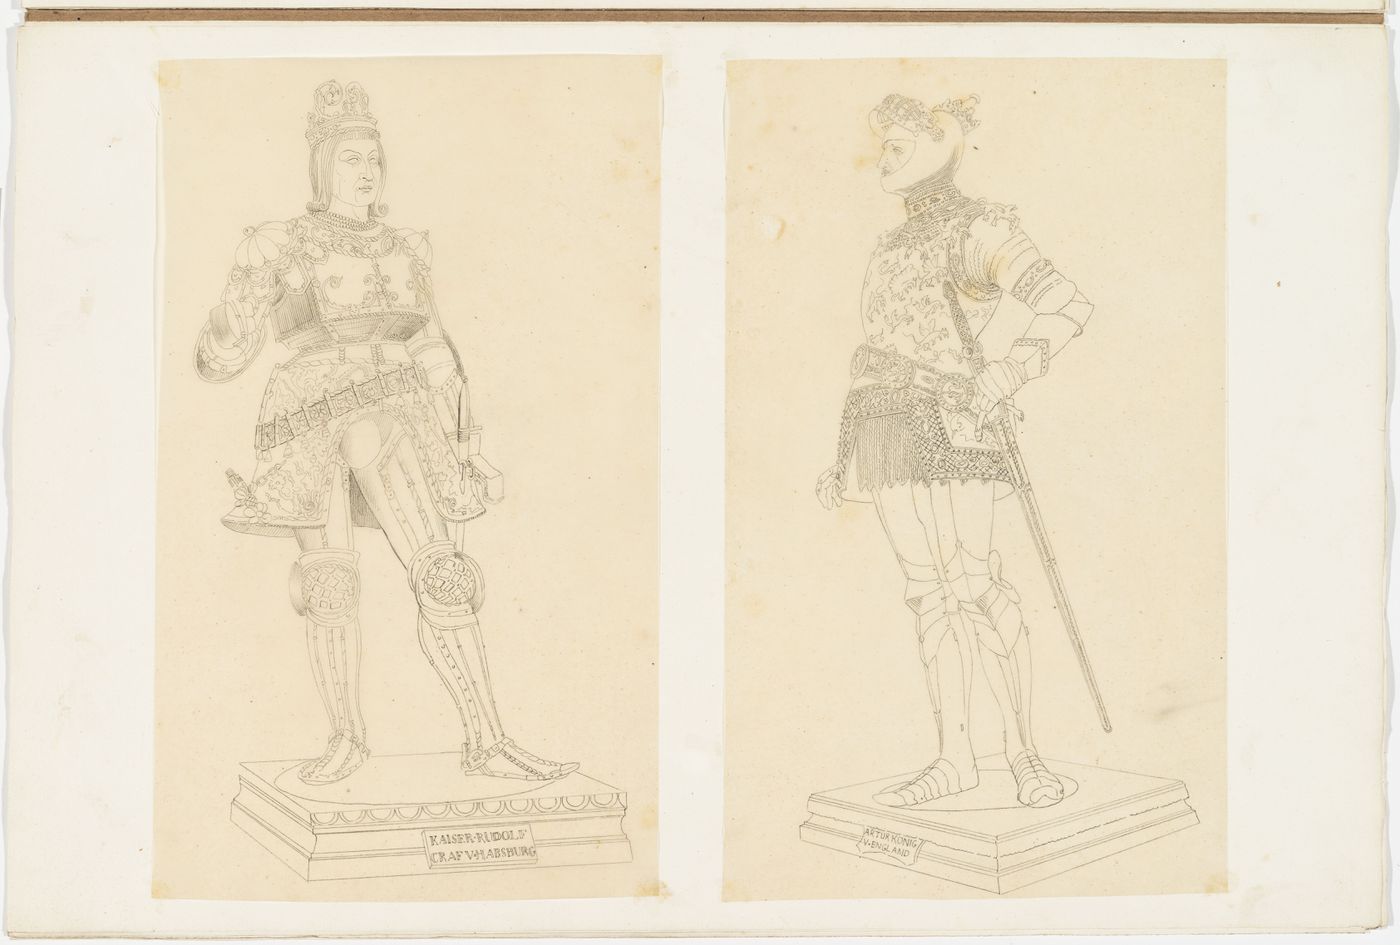 Drawings of the statues the Emperor Rudolf of Habsburg and Arthur the legendary Celtic King, from the cenotaph of Emperor Maximilian I, Hofkirche, Innsbruck